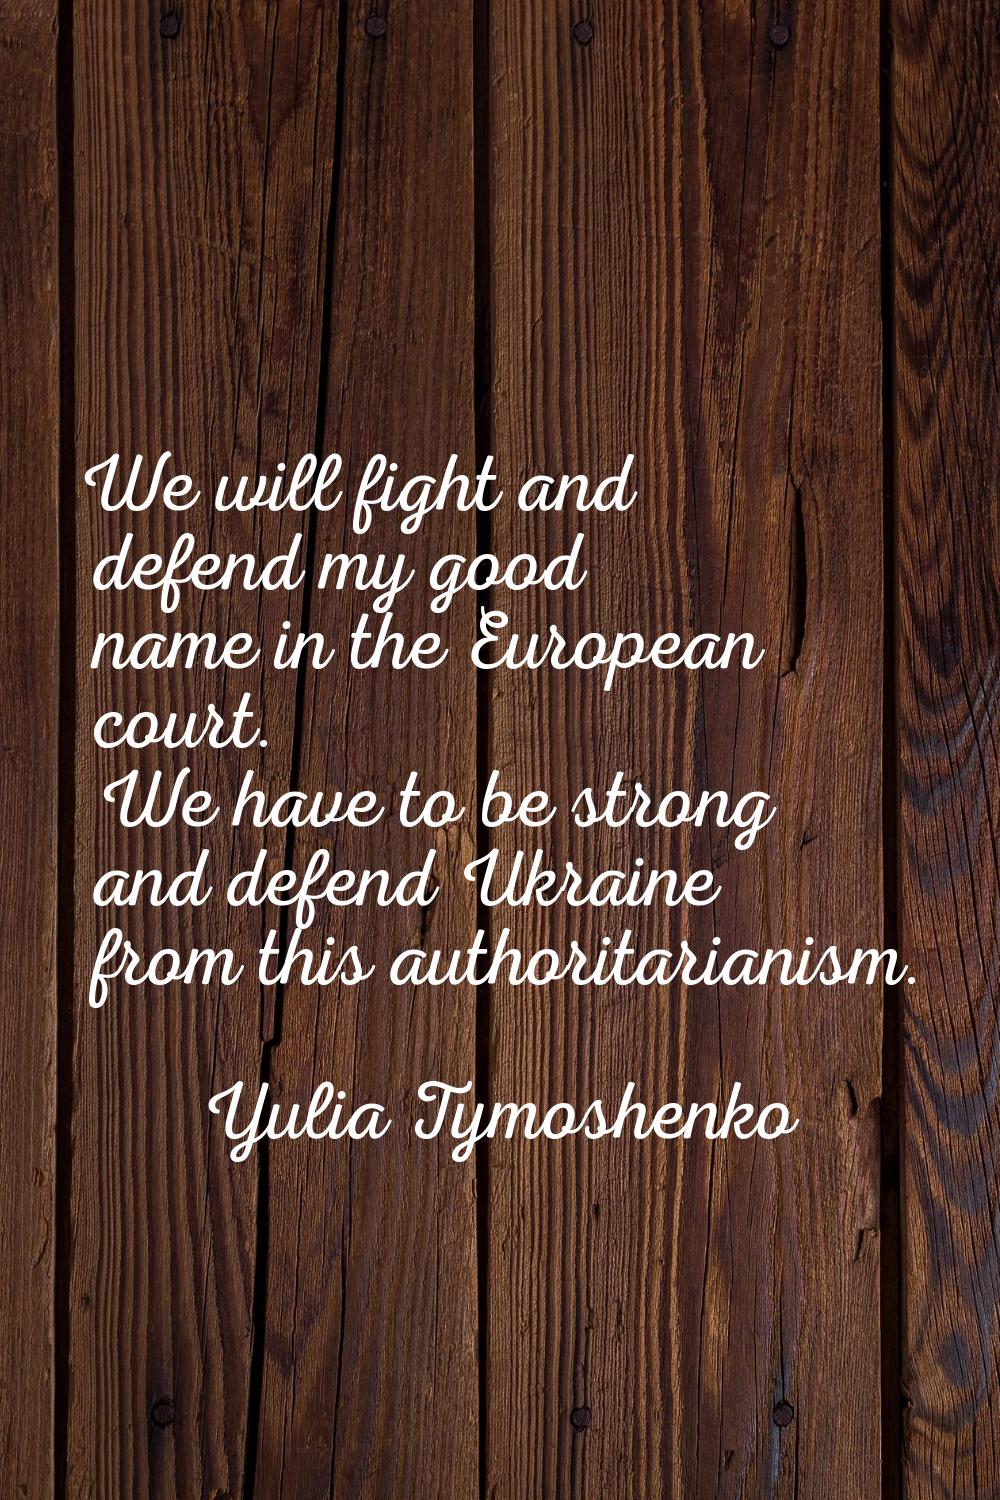 We will fight and defend my good name in the European court. We have to be strong and defend Ukrain